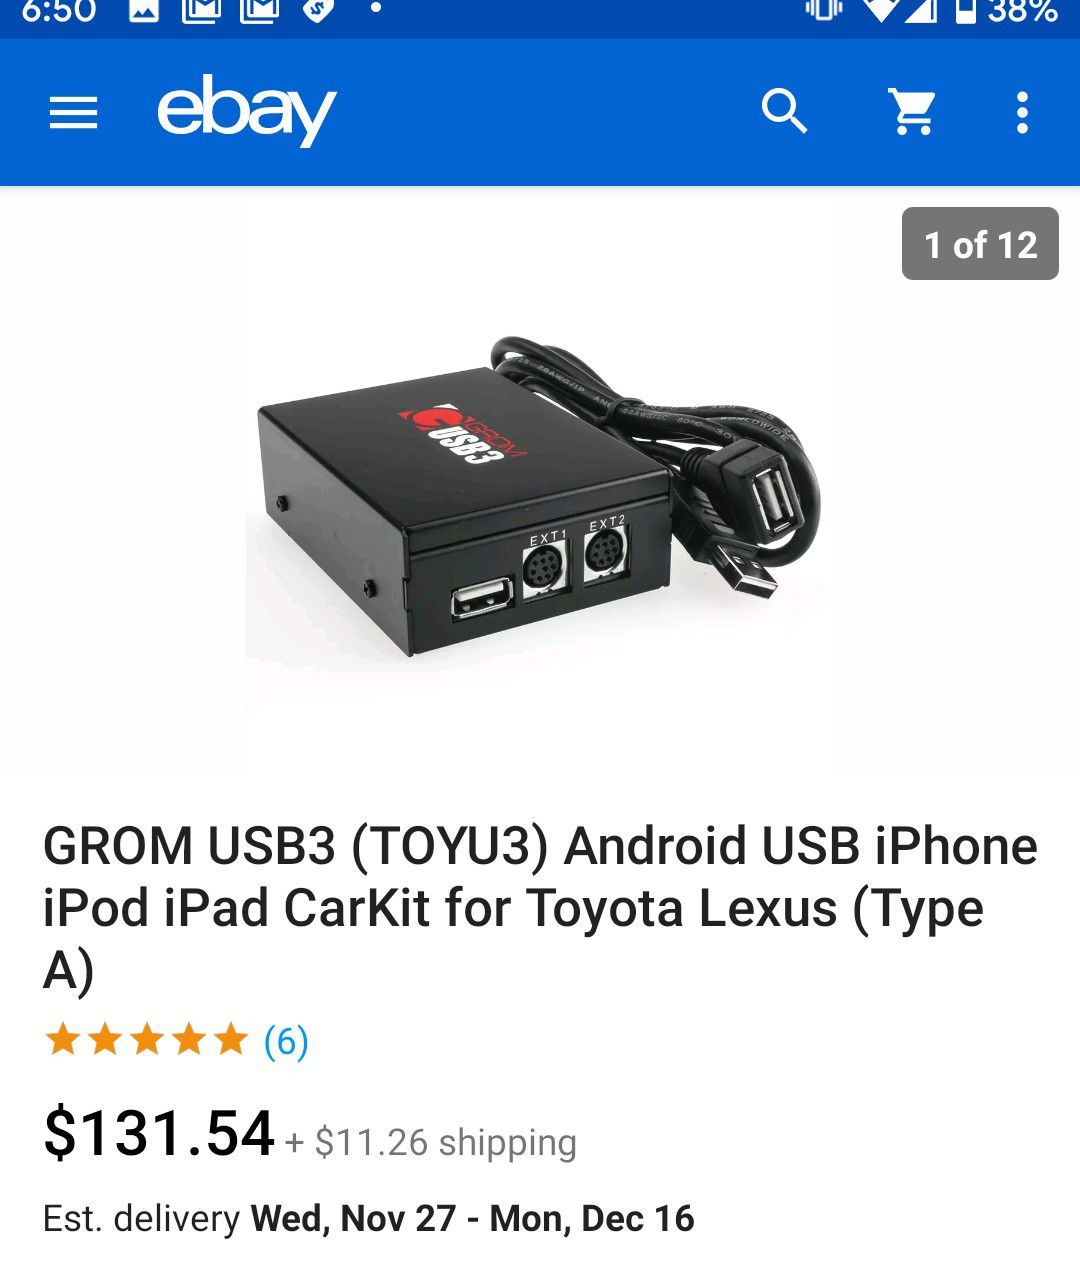 GROM USB3 (sku: TOYU3) brand new car audio adapter- no cables included